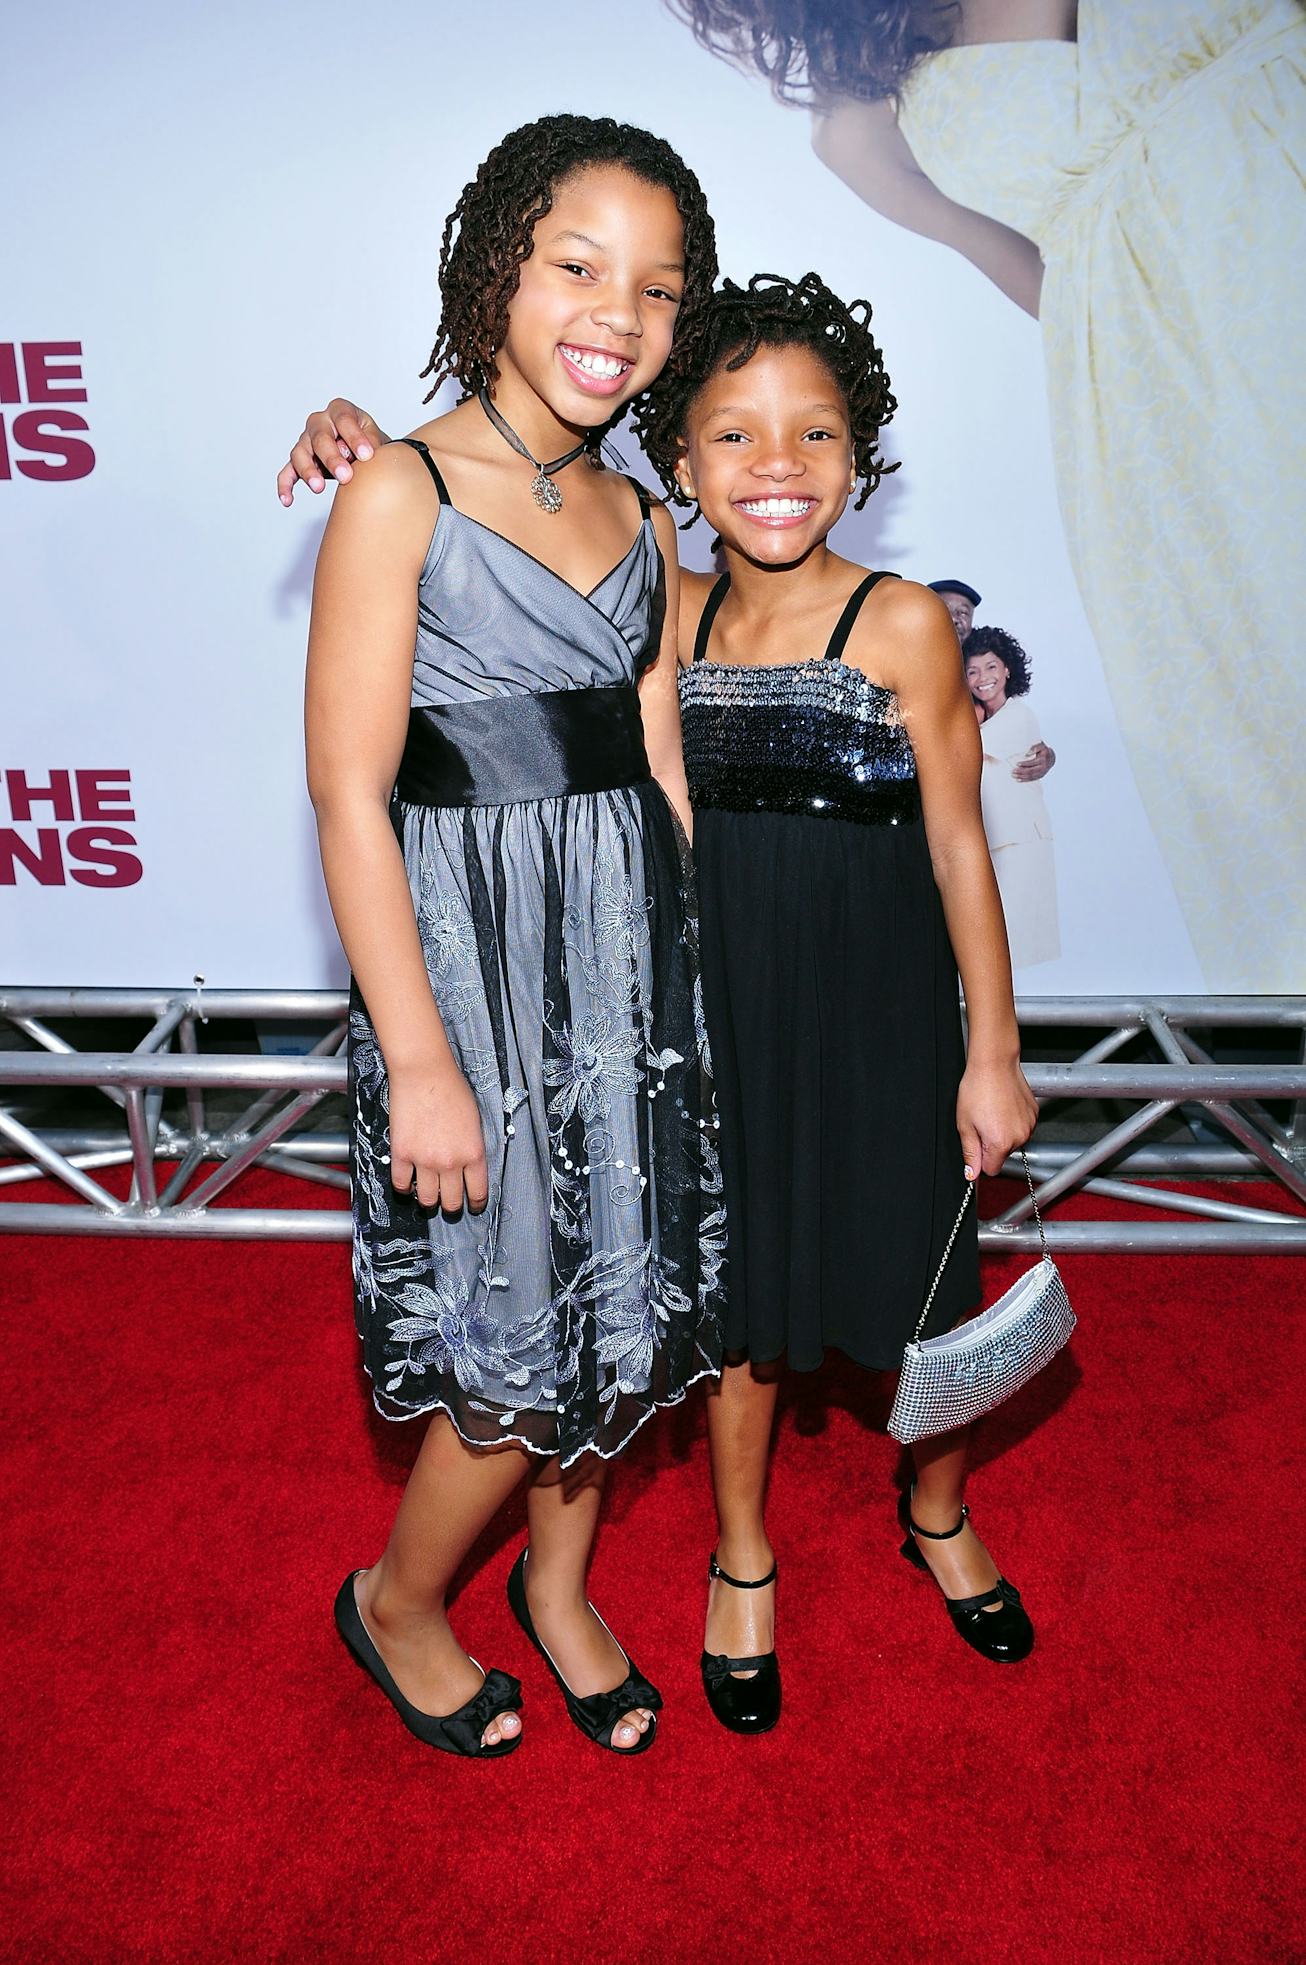 Chloe x Halle at the 2008 premiere of "Meet The Browns" 